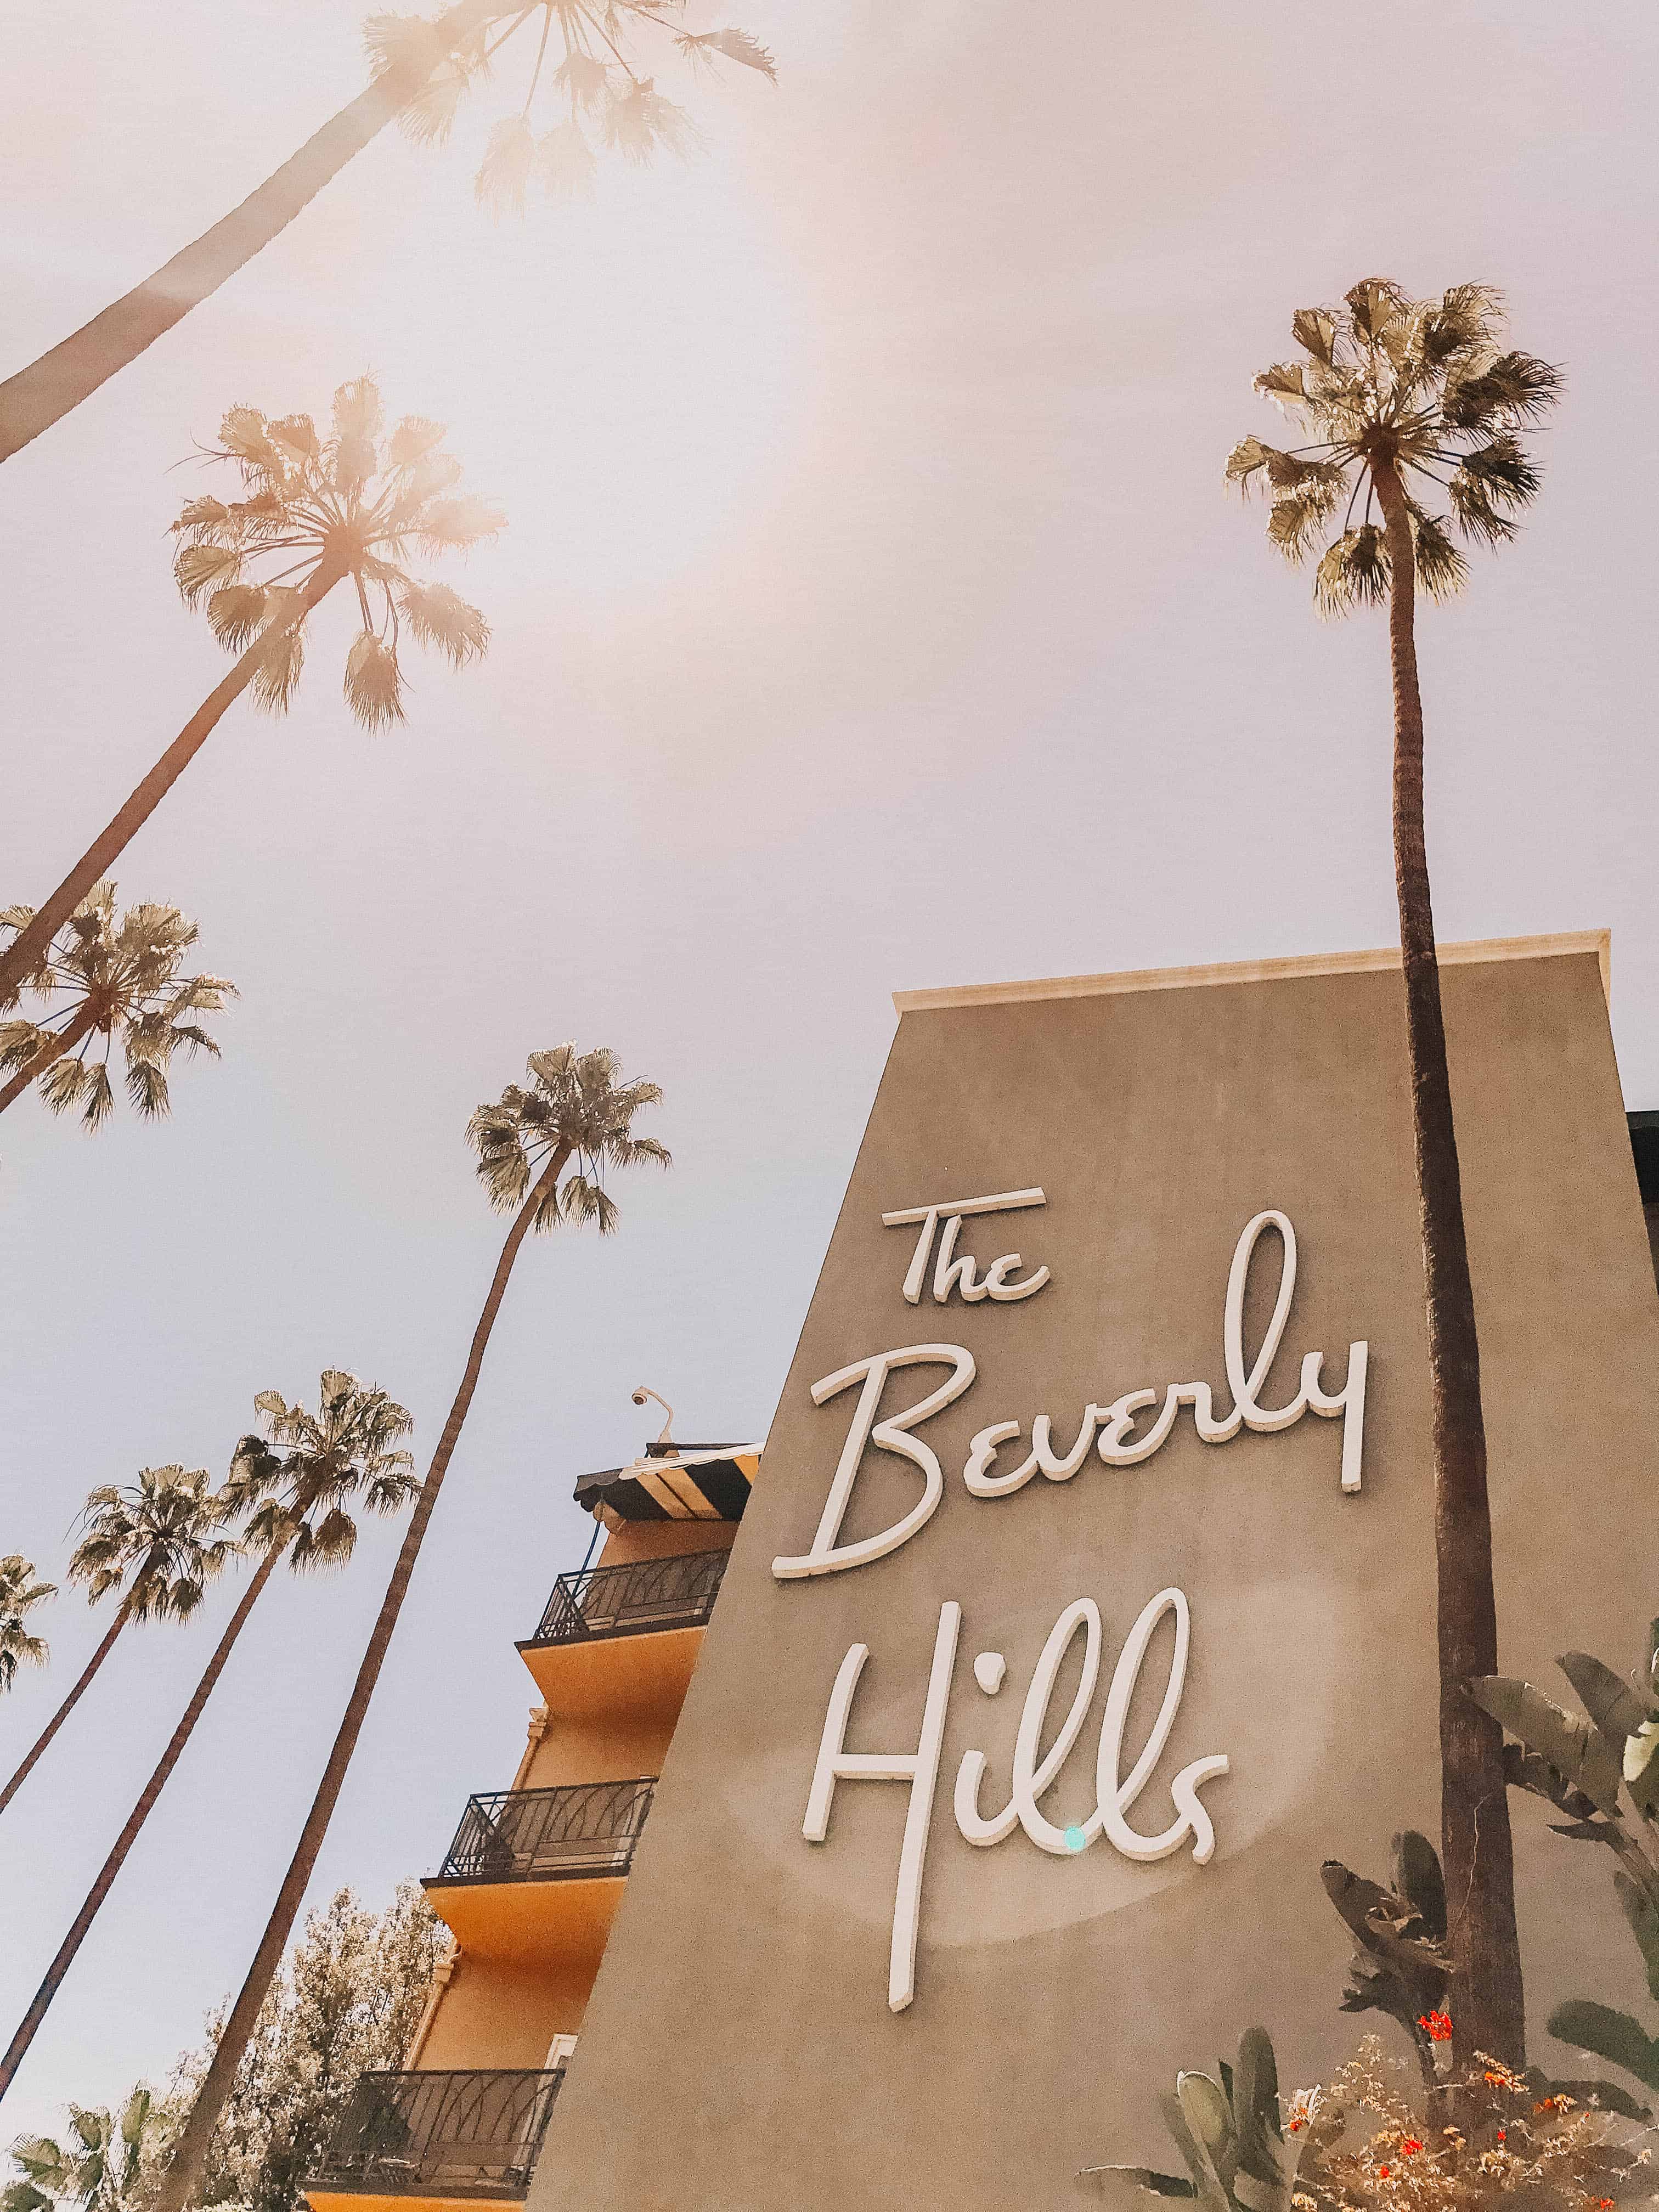 HOW TO HAVE A GREAT DAY IN BEVERLY HILLS - THAT DOESN'T INVOLVE